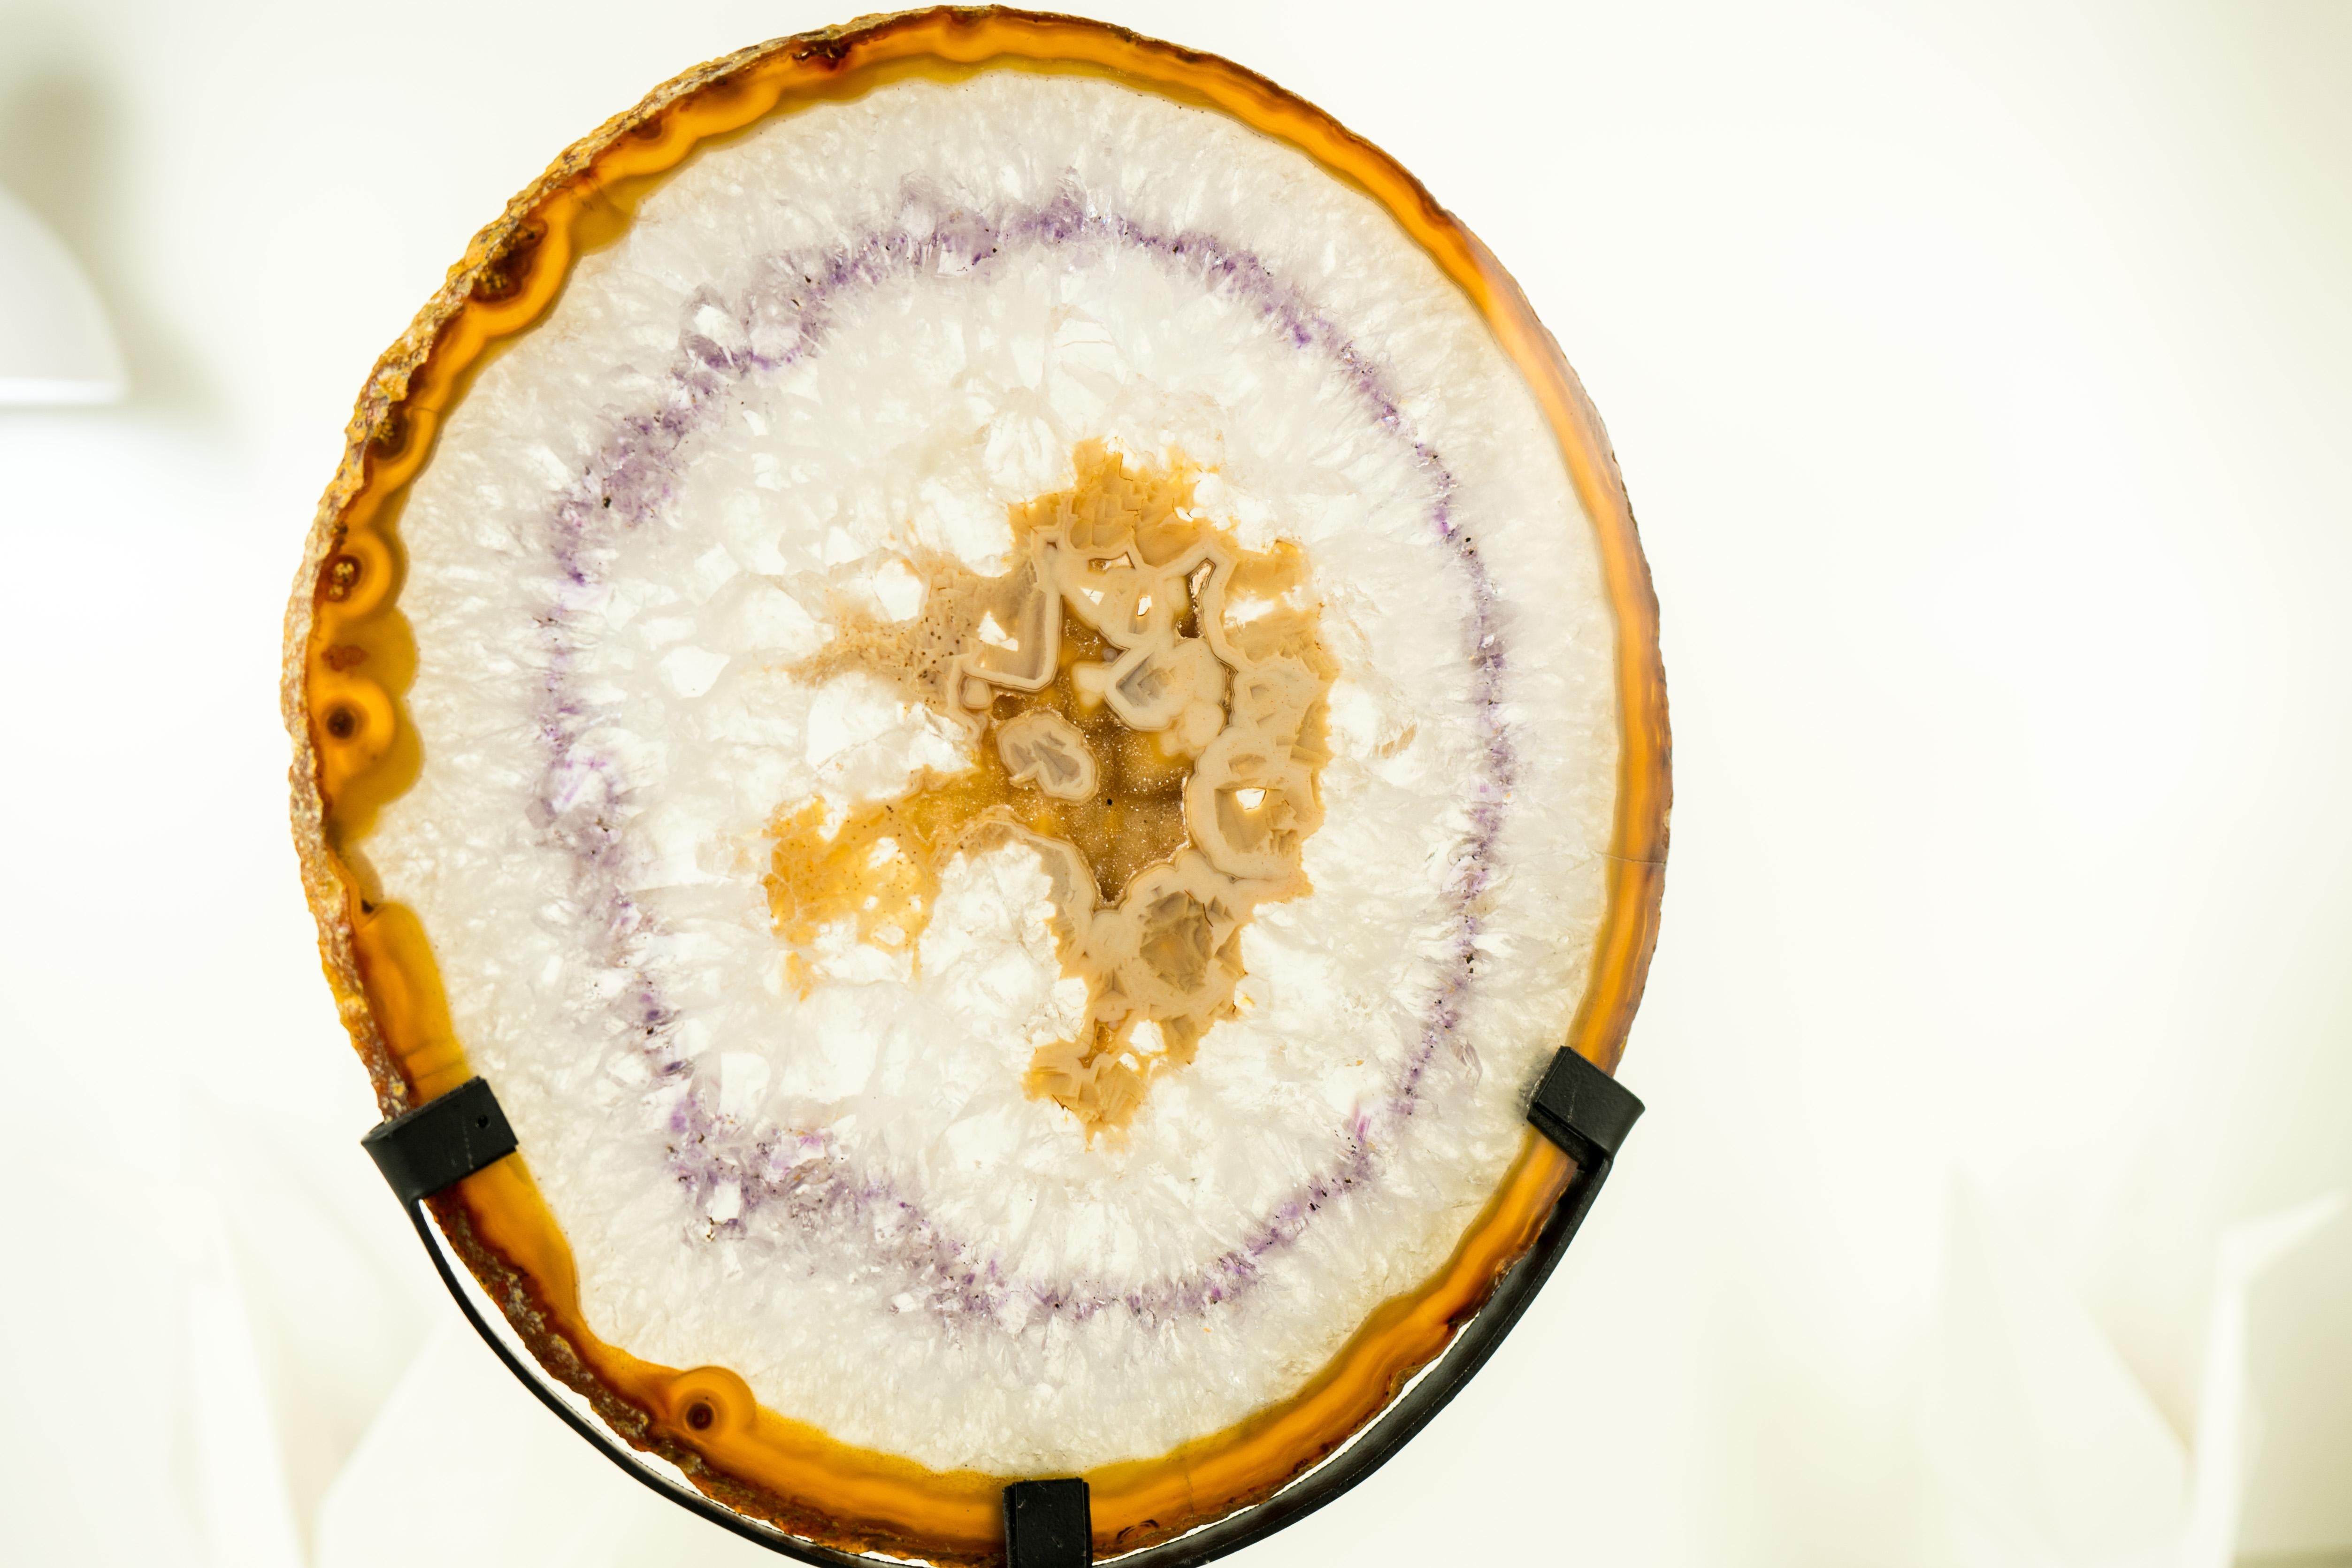 Rare Natural Lace Agate Slice with Clear Quartz, Amethyst Lace, and Yellow Chalcedony with Sugar Druzy

▫️ Description

This agate slice is a stunning example of nature's artistry, displaying unique and seldom-seen features that combine to create a